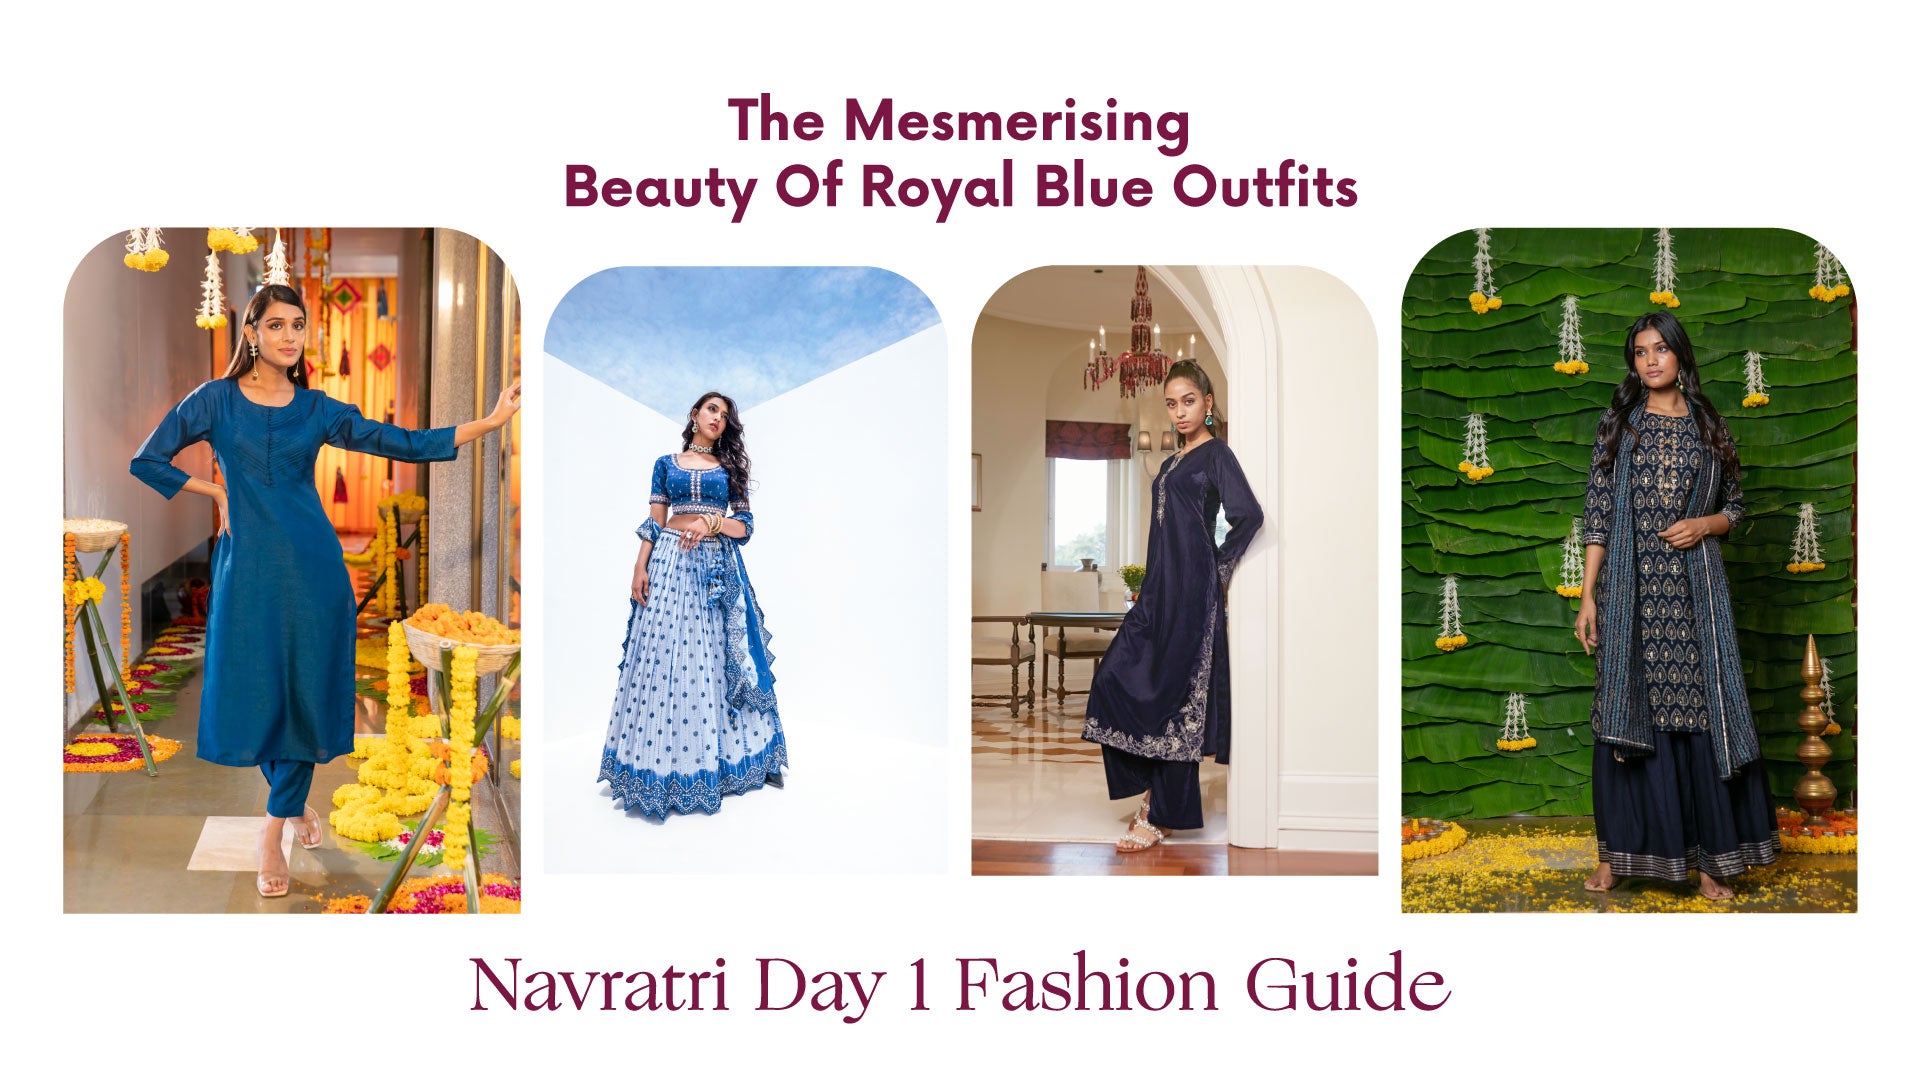 The Mesmerising Beauty Of Royal Blue Outfits: Navratri Day 1 Fashion Guide